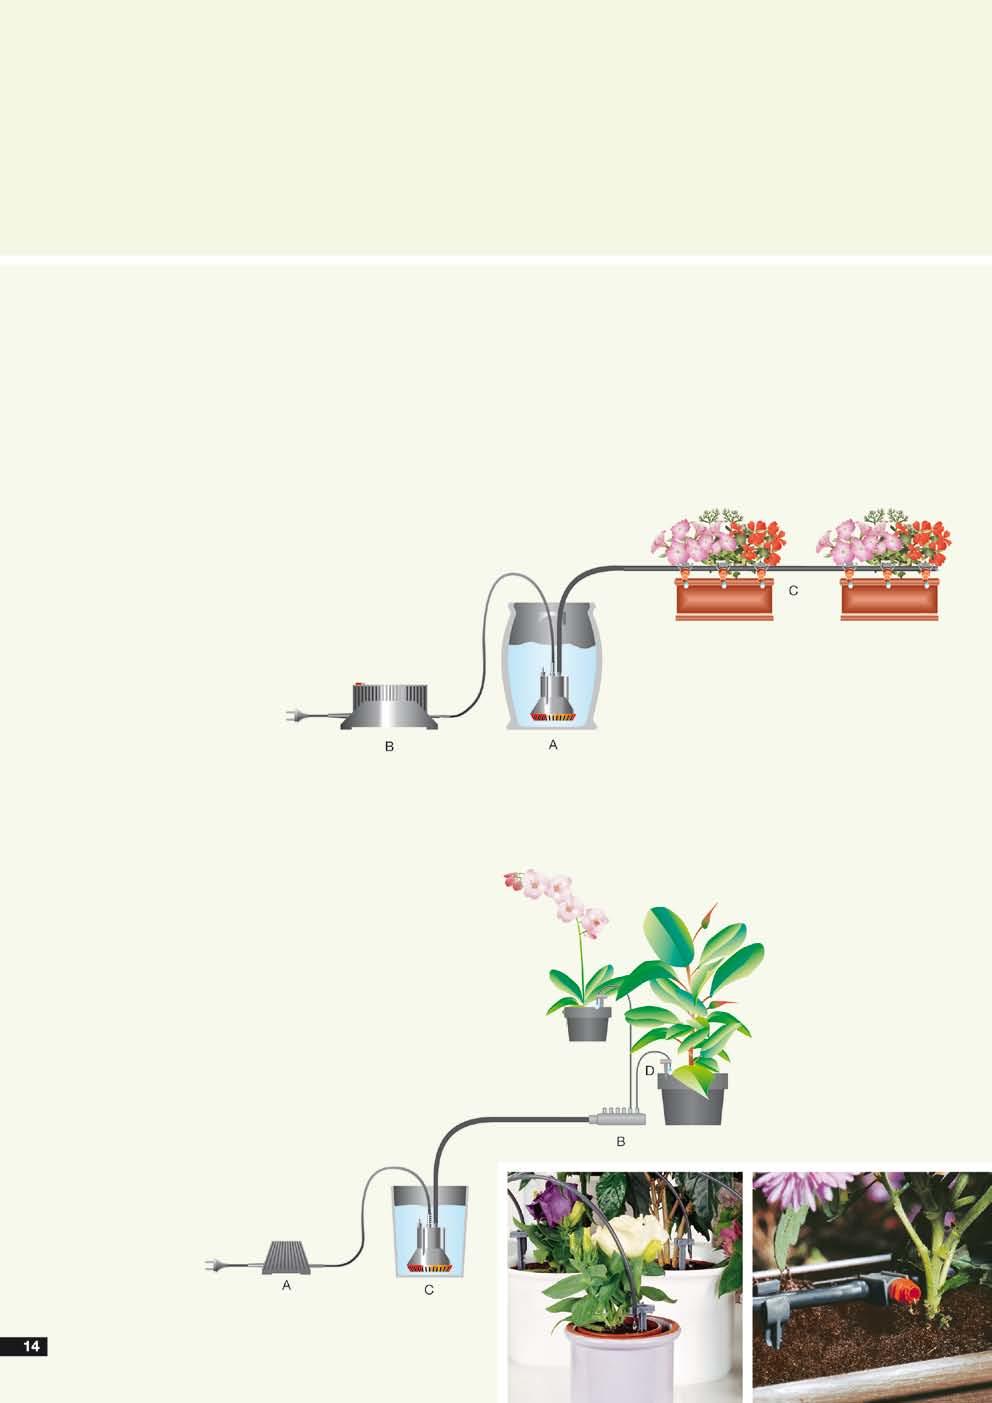 Watering without a tap for flower boxes and balcony planters Fully automatic flower box watering For watering up to 5-6 m of containers.